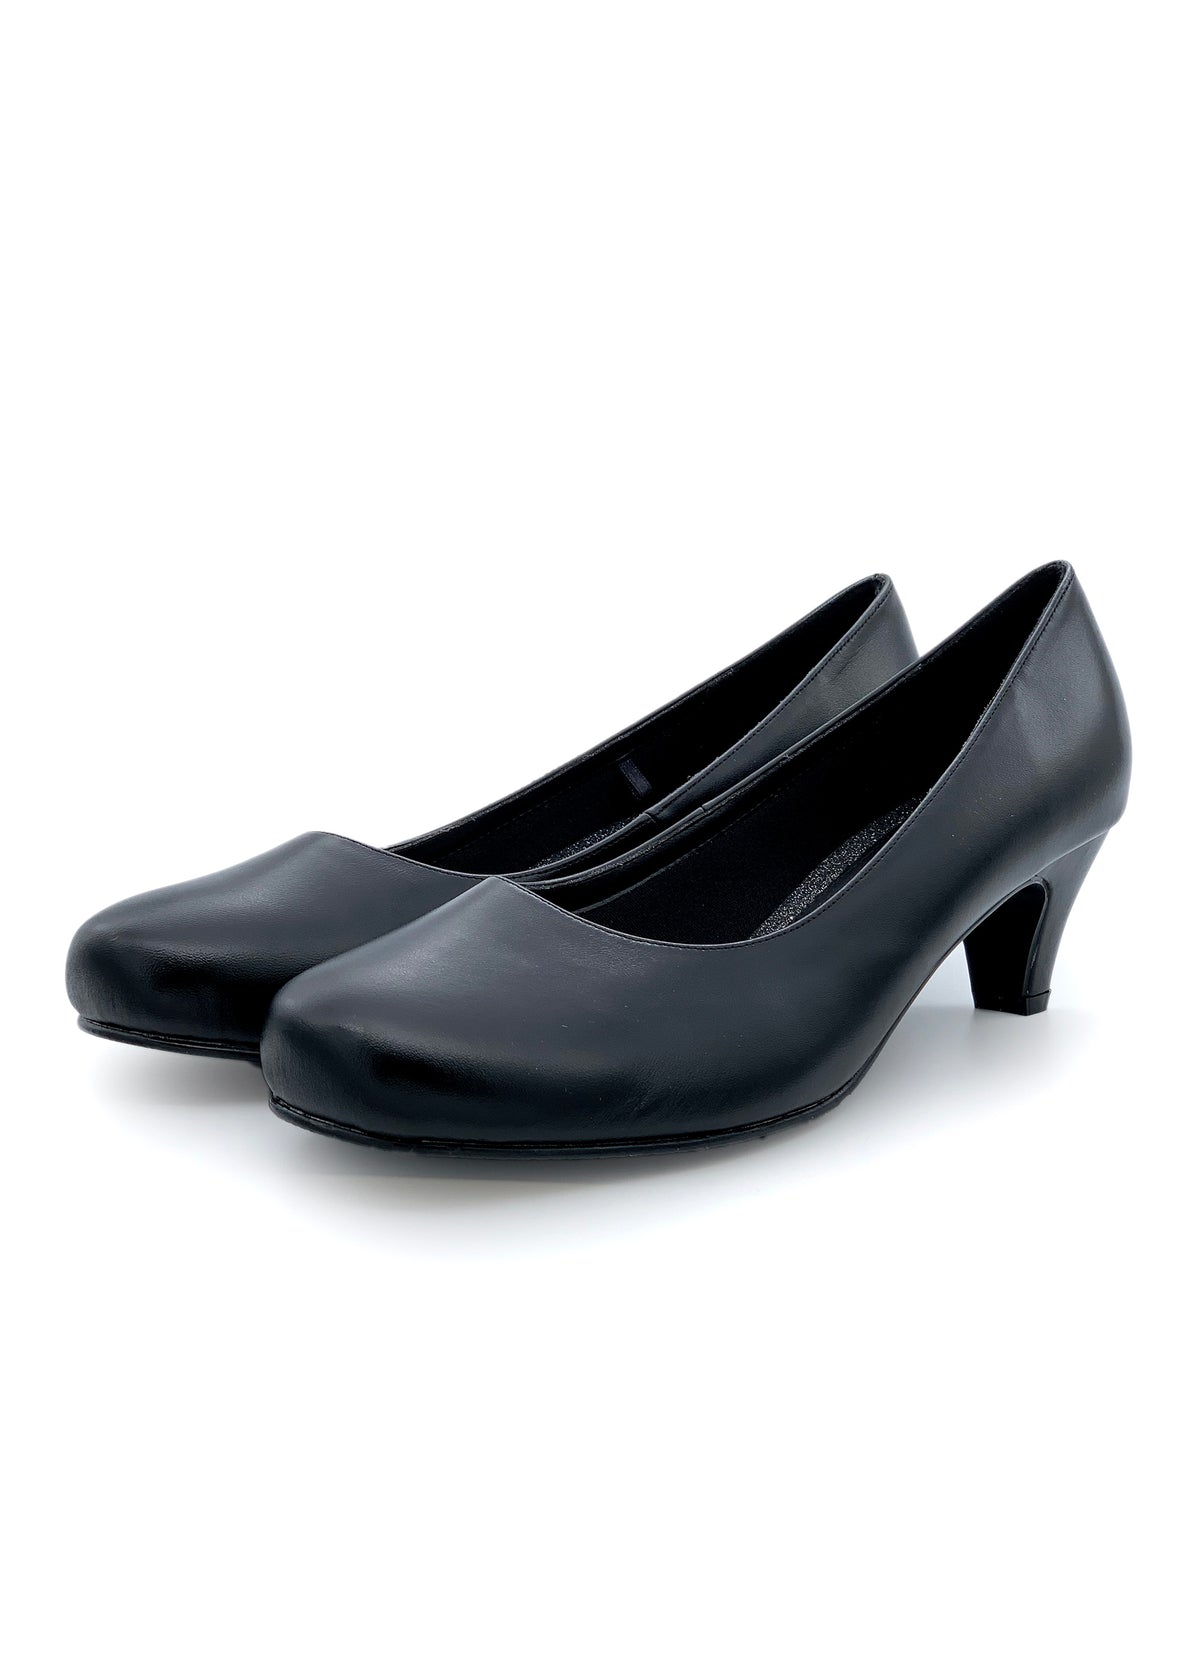 Open-toed shoes - black, wide lace